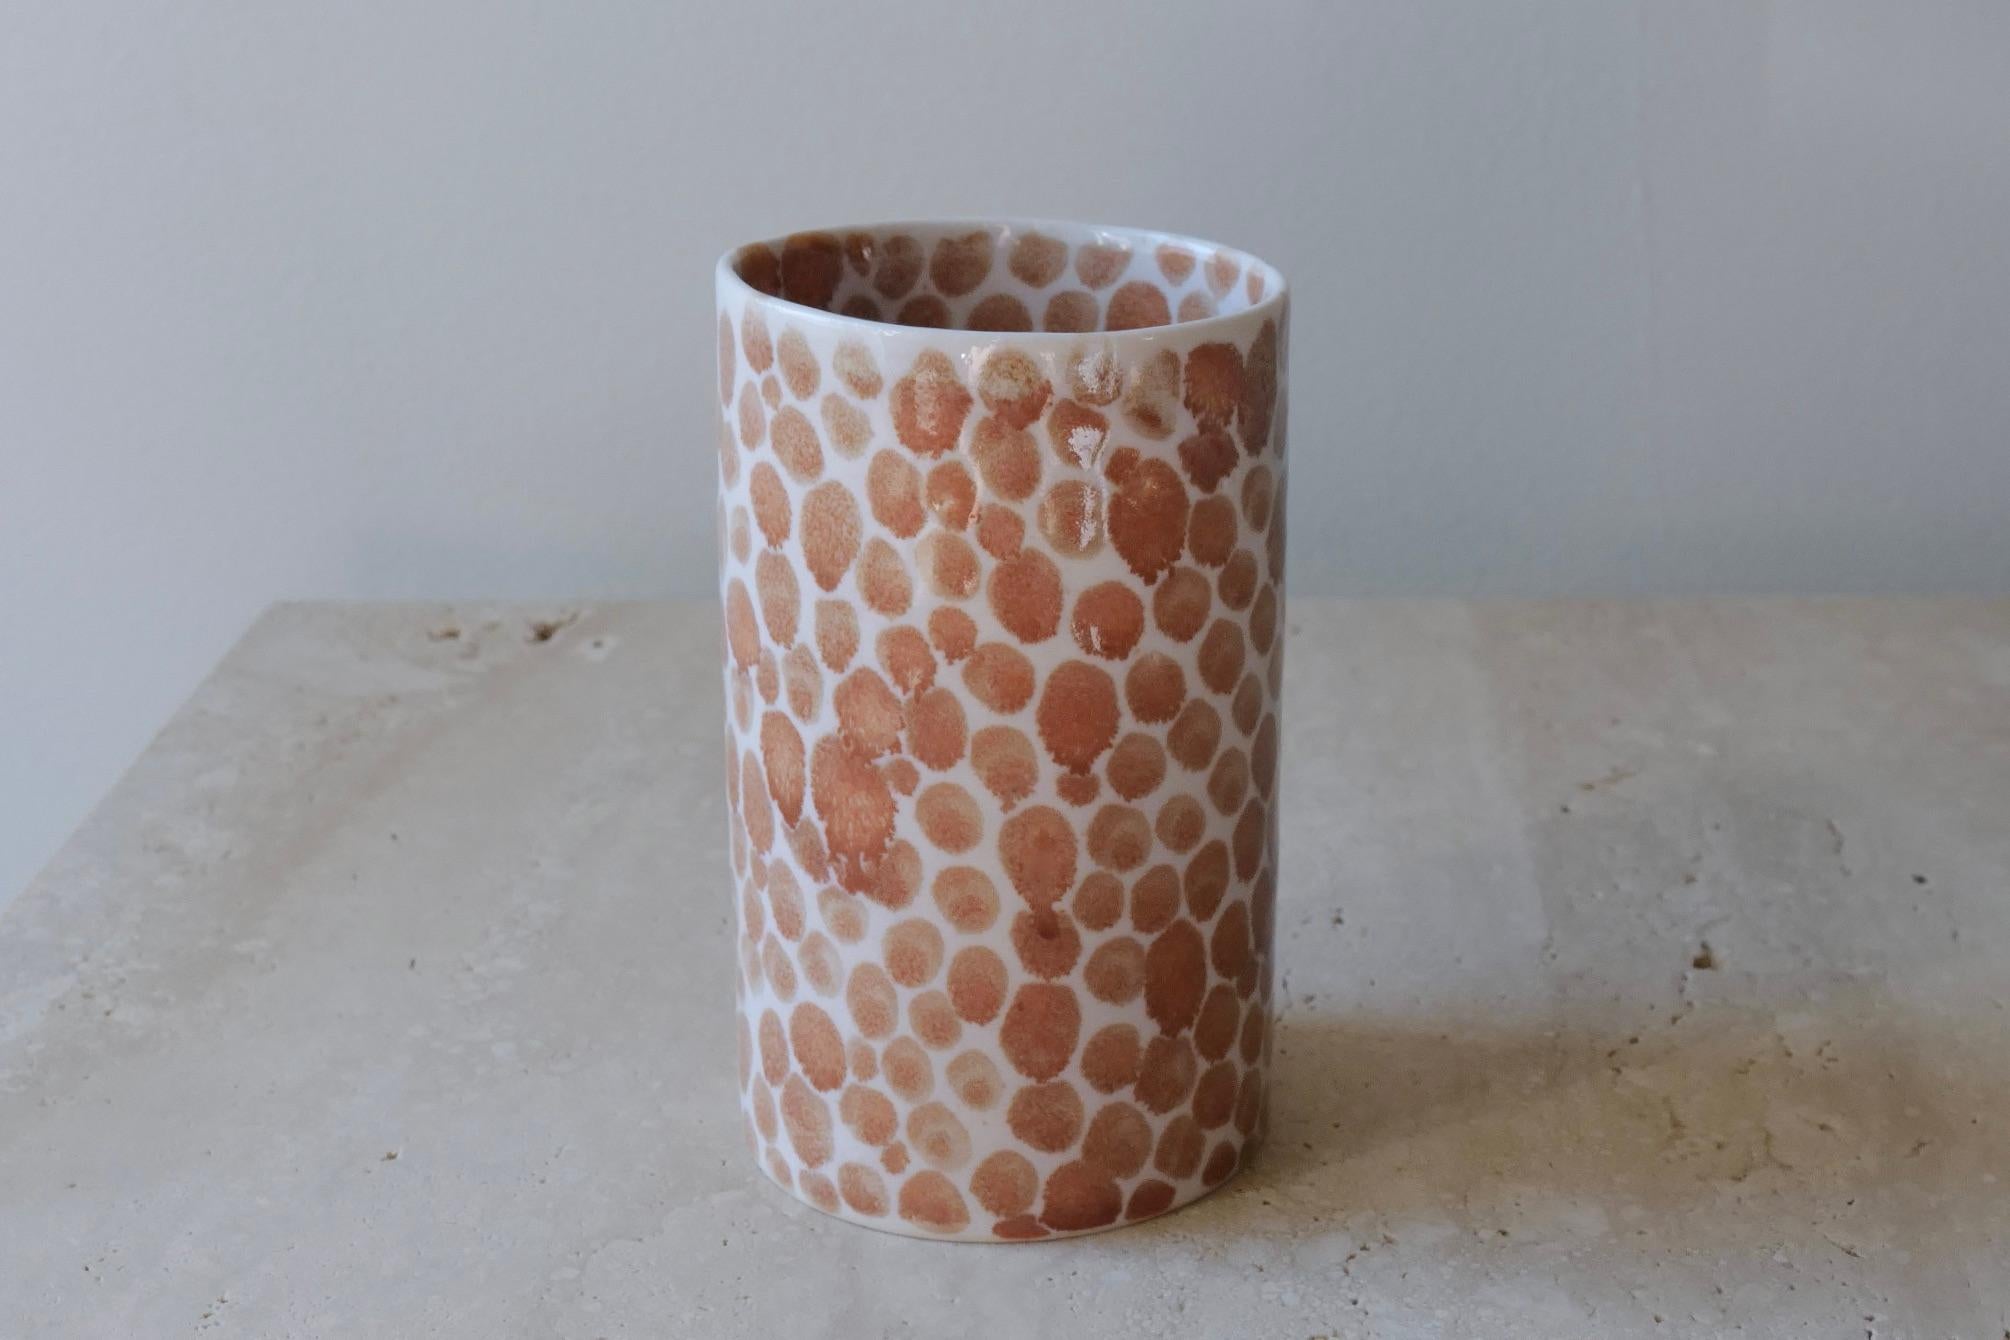 Ceramic drinking cup. Hand-cast in porcelain and once bisque fired, each dot is hand painted with a tan glaze. An unconventional layered glazing technique, developed by the artist, is used in these cast porcelain pieces. The straight walls and sleek